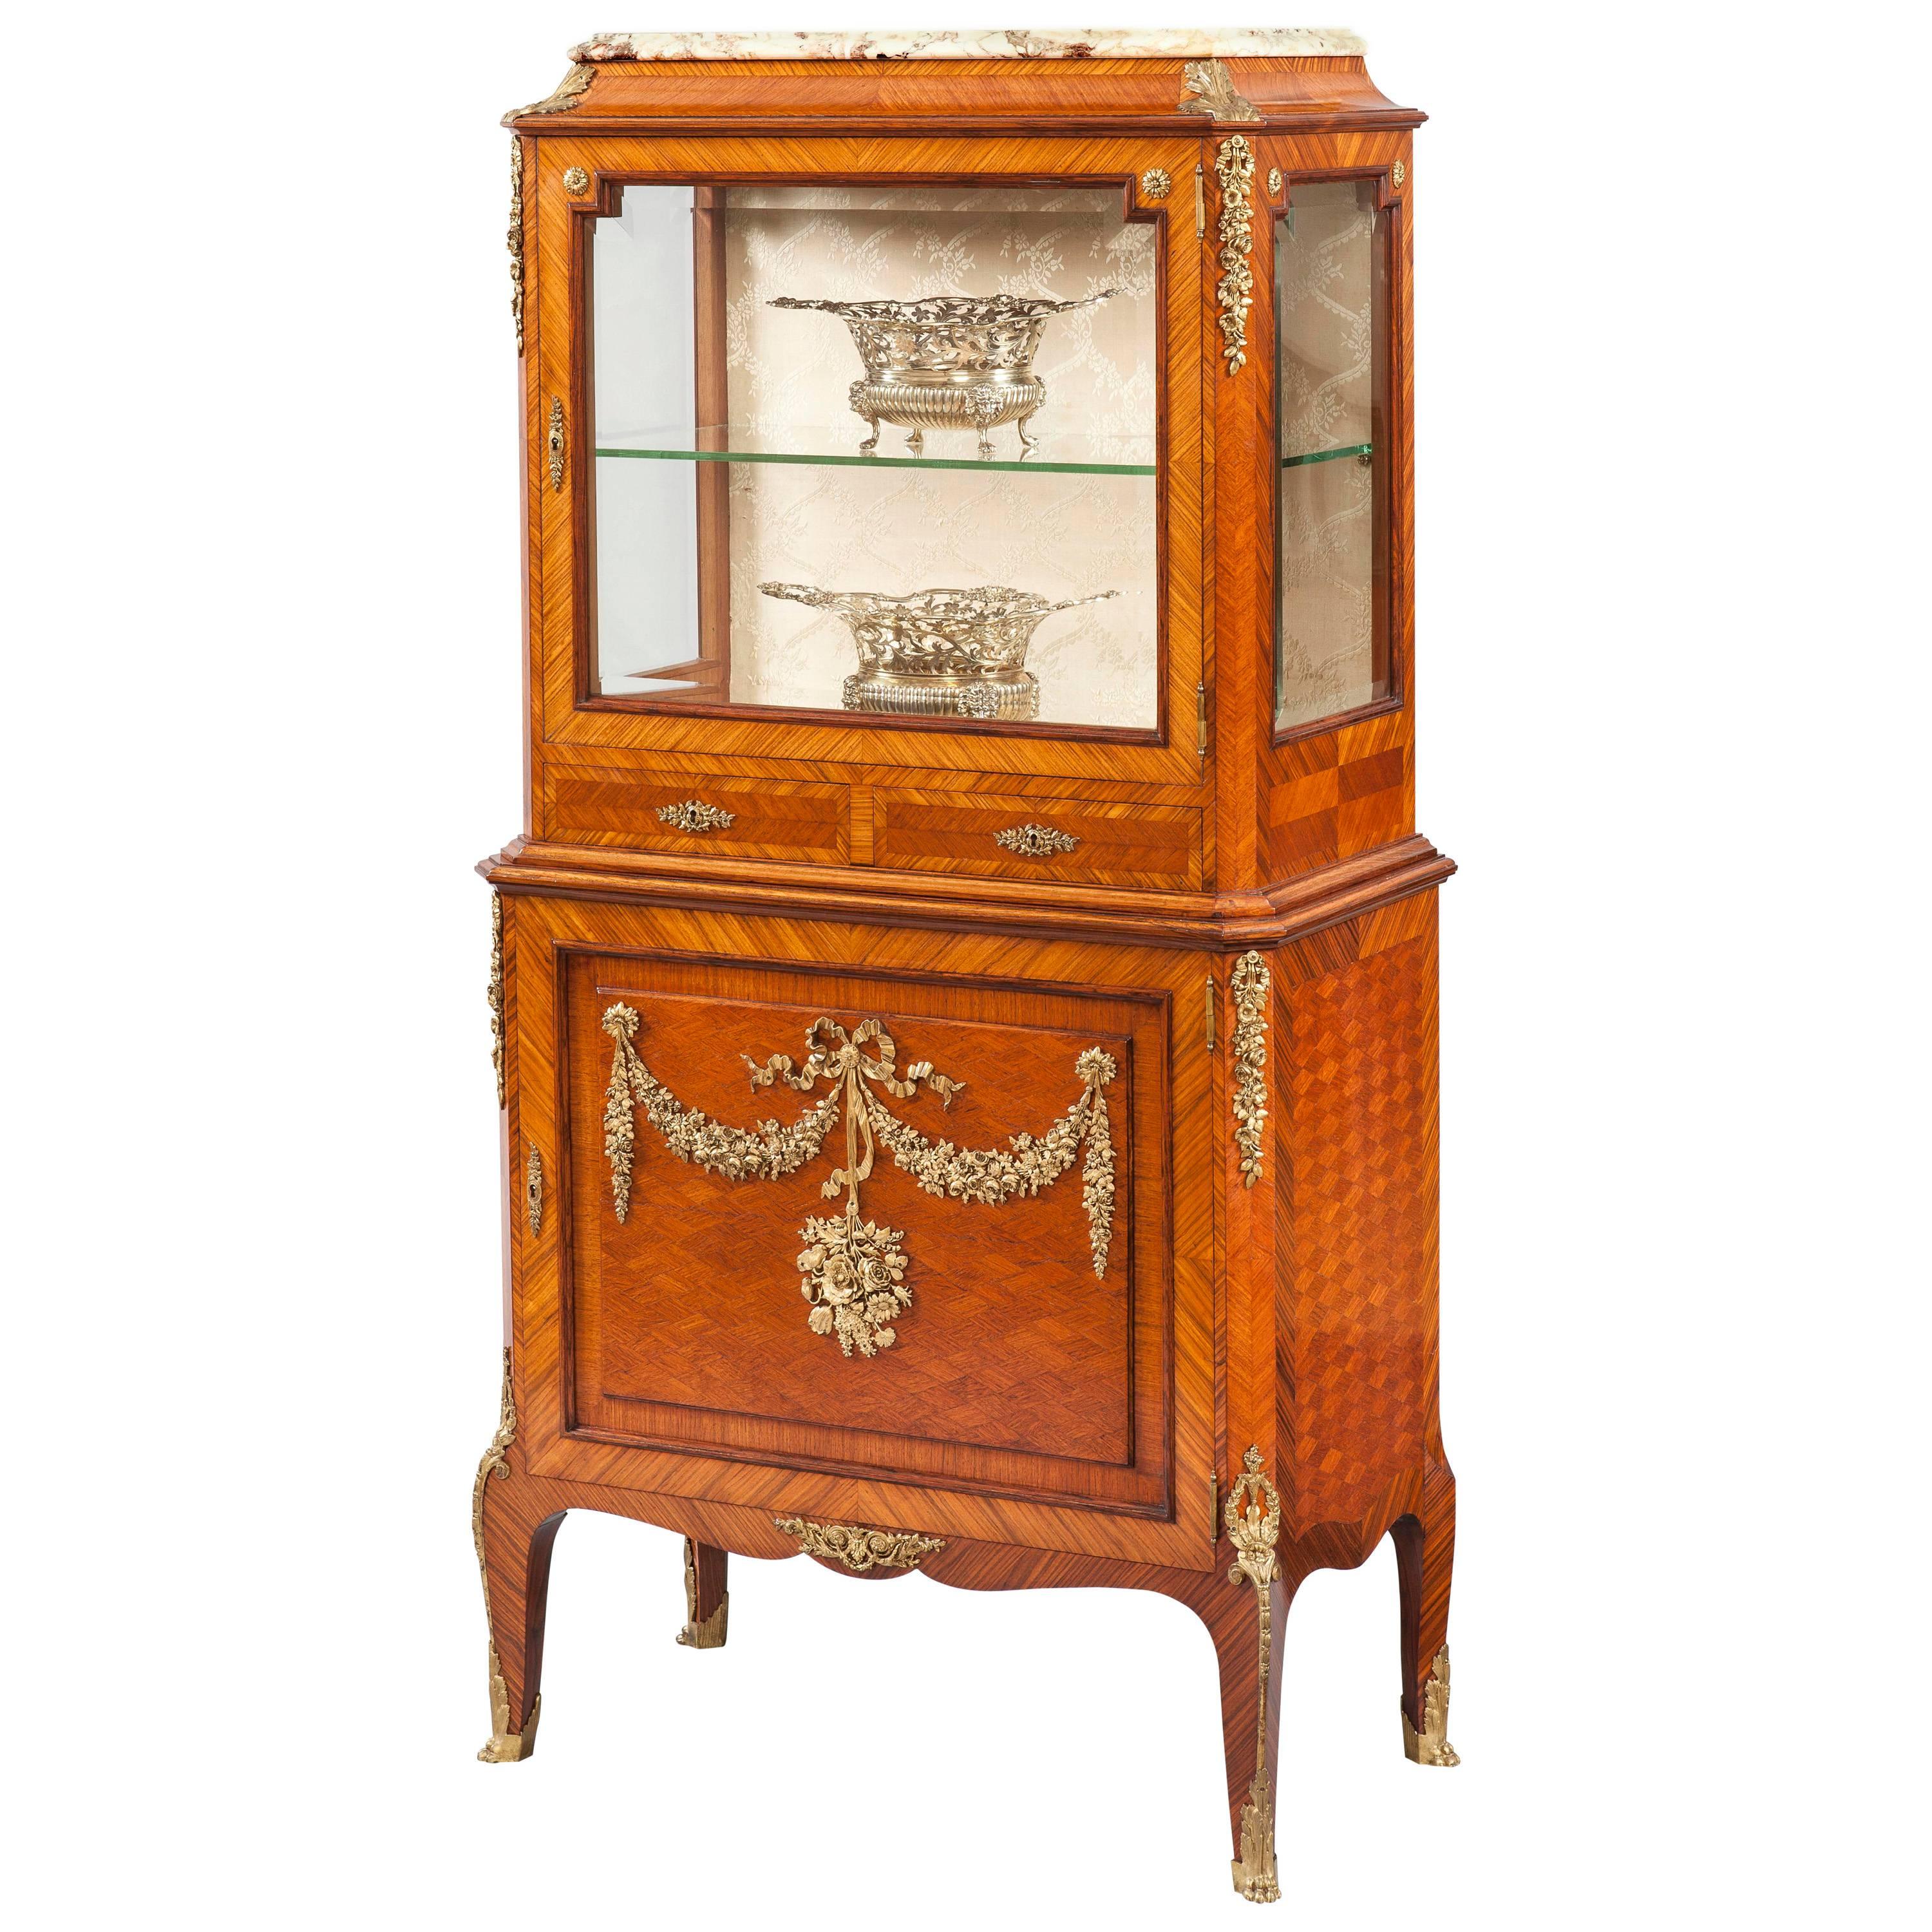 French Kingwood Parquetry and Floral Ormolu-Mounted Cabinet, 19th Century